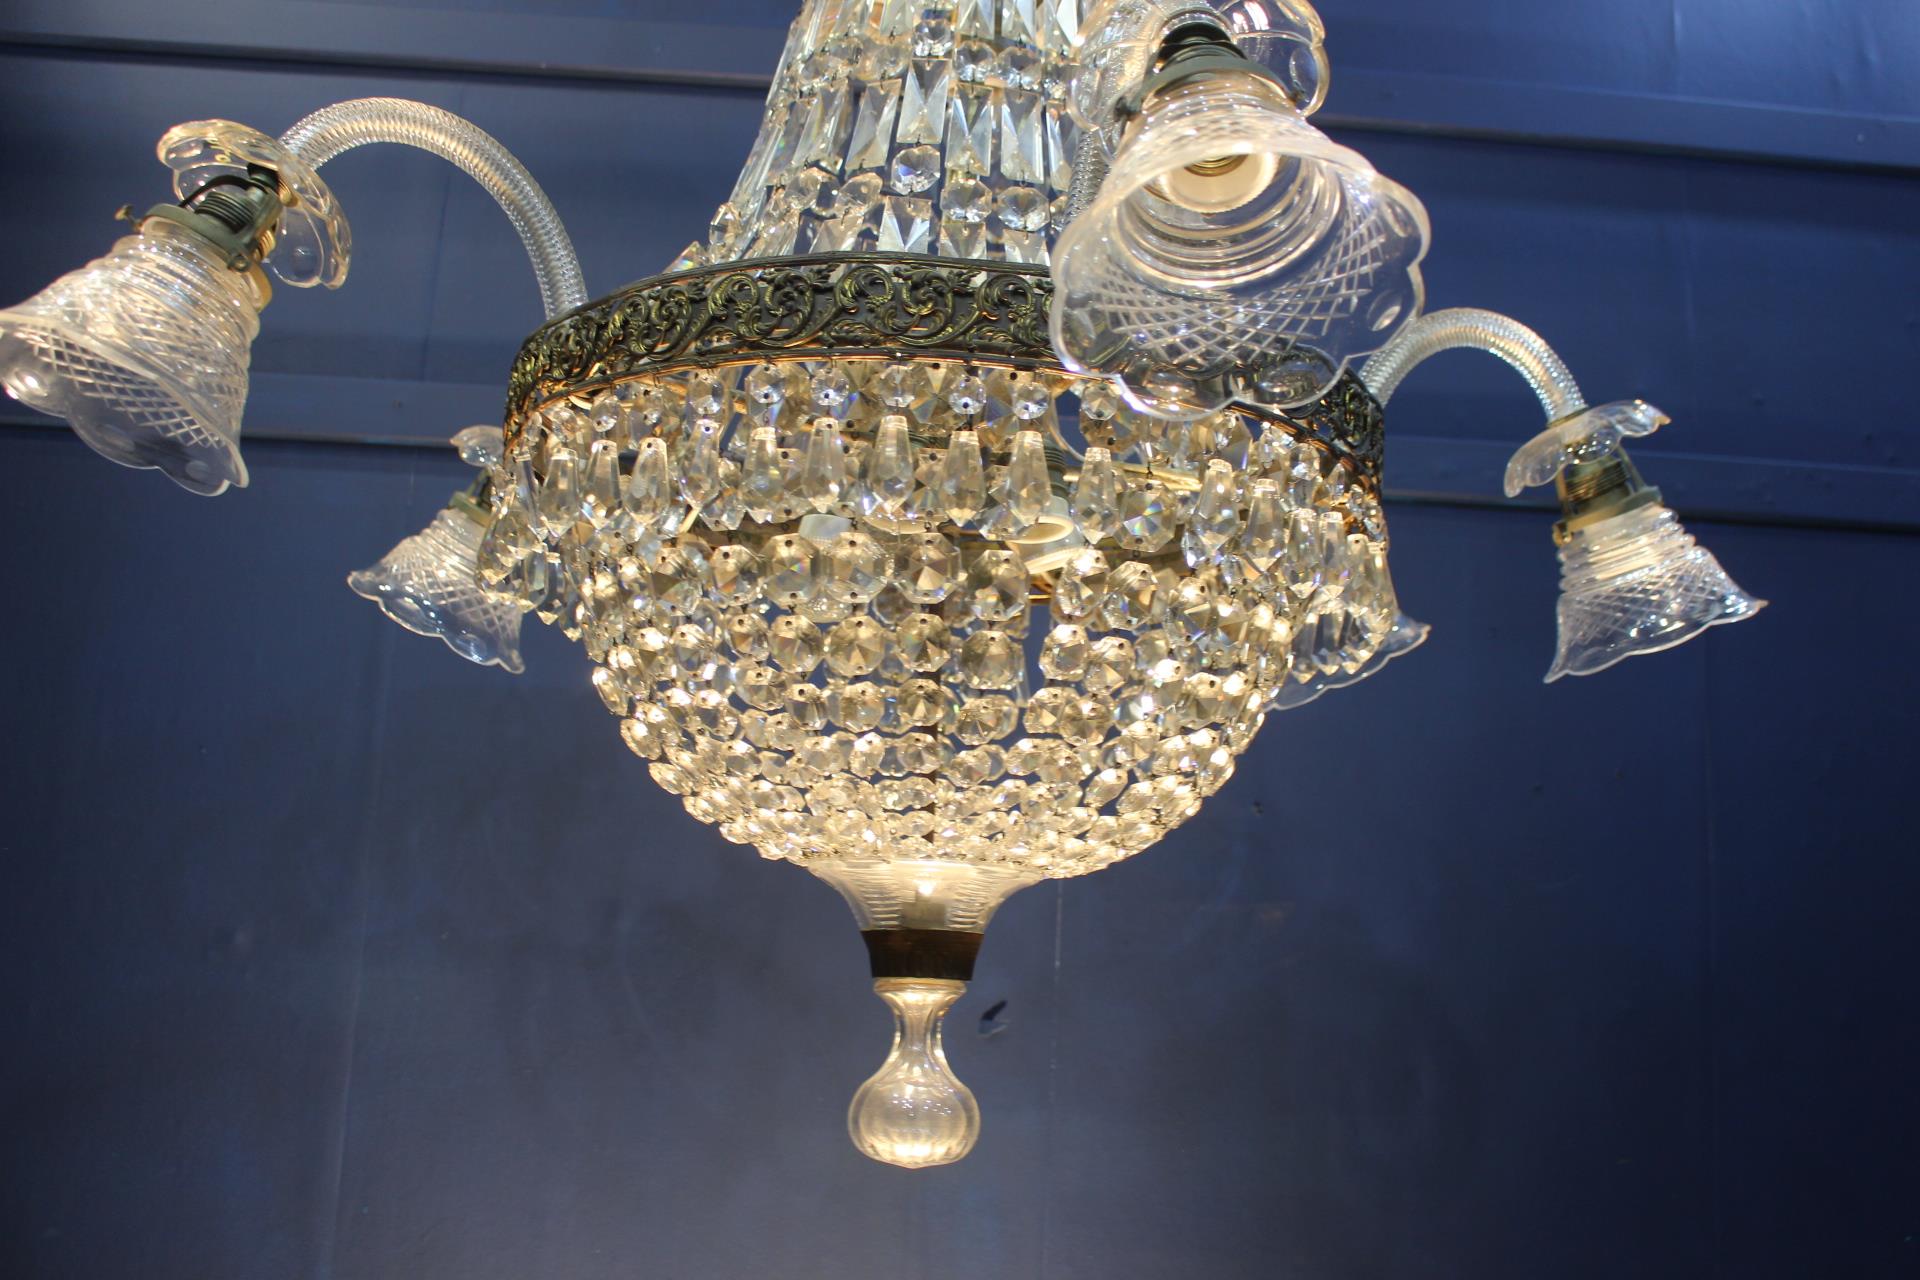 Mokano brass and cut glass five branch chandelier {H 100cm x Dia 95cm}. - Image 6 of 6